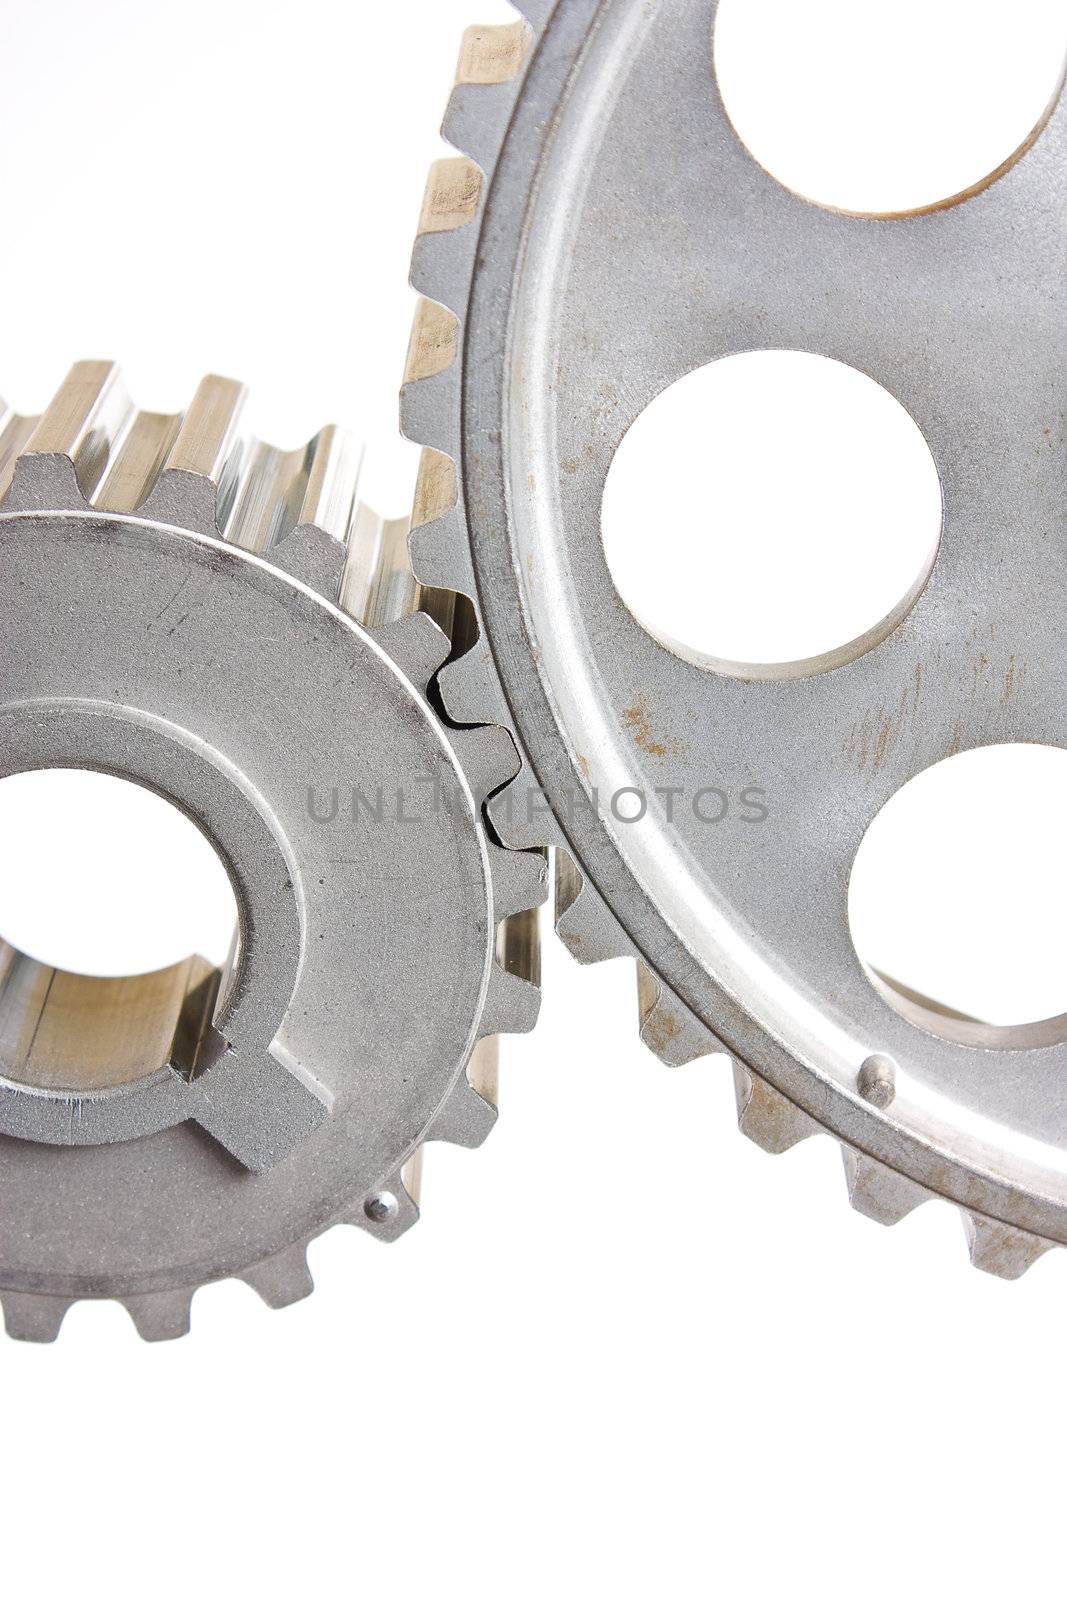 gears of mechanisms isolated on a white background